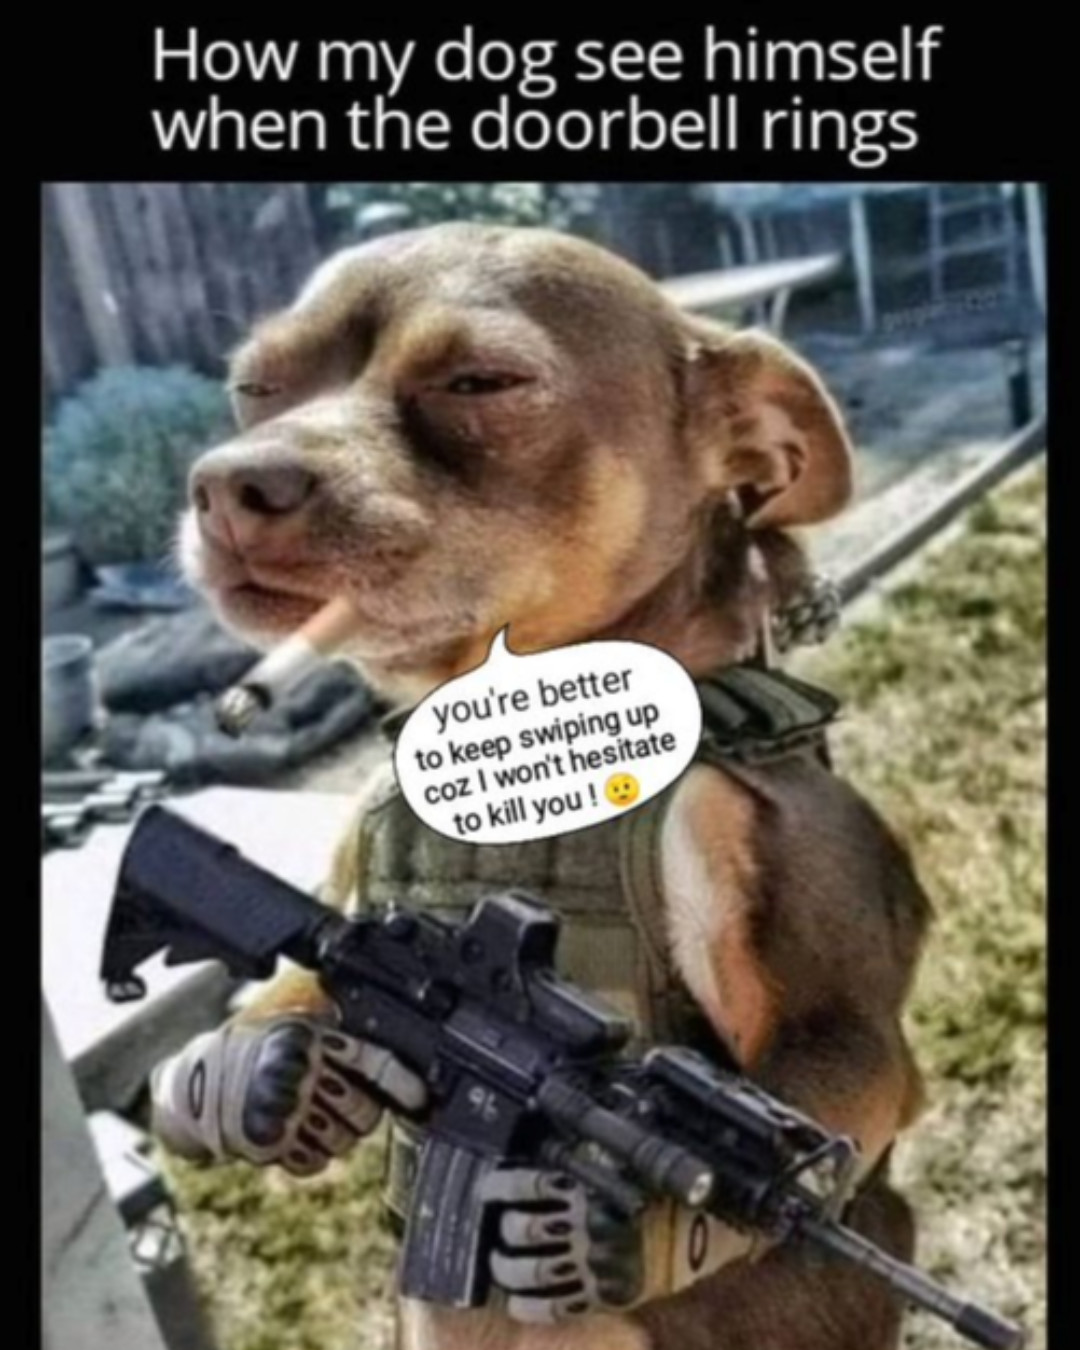 small dog in fatigues with a mini AR15. Captioned: How my dog see himself when the doorbell rings